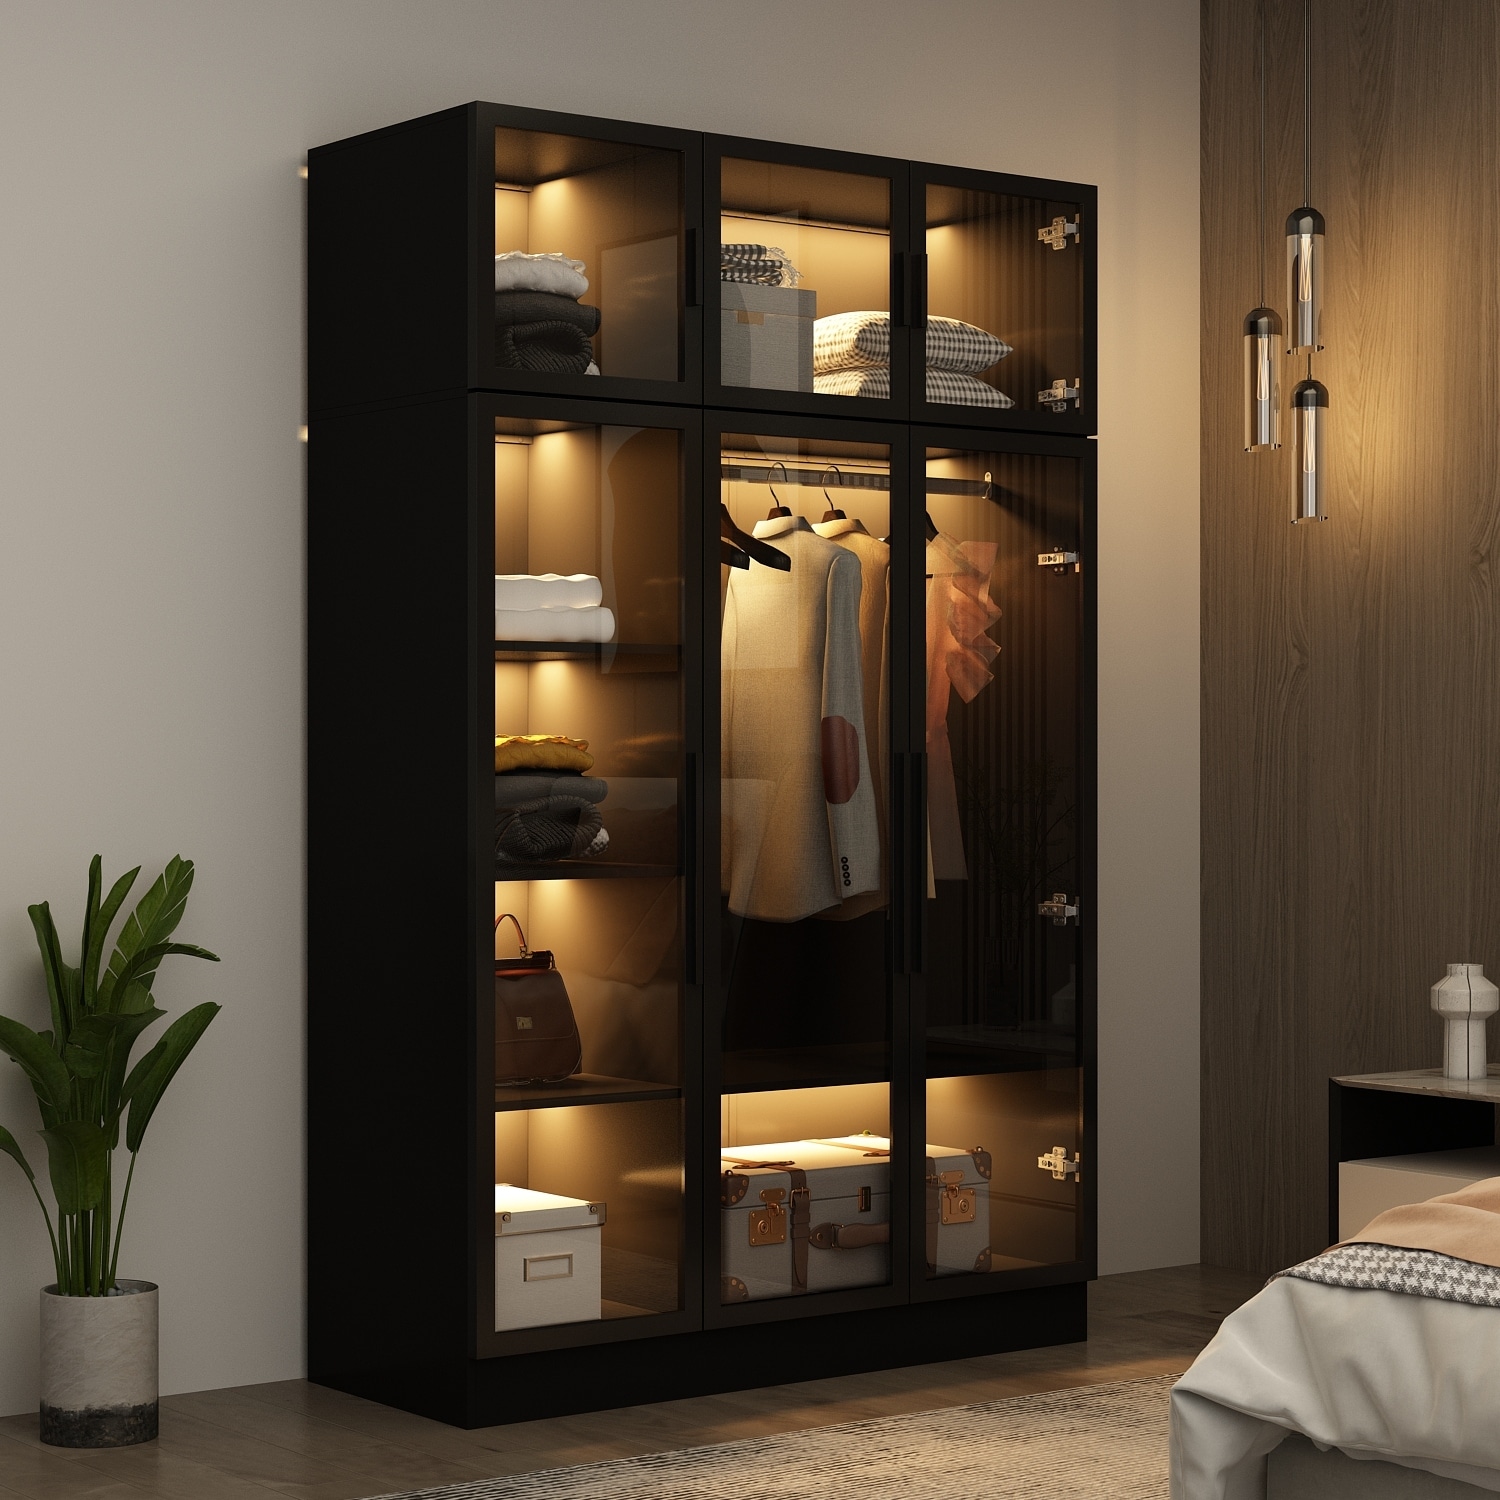 https://ak1.ostkcdn.com/images/products/is/images/direct/6e3f750c536af8bf2706906103979b31a10722be/Glass-Door-Wardrobe-Armoire-Storage-Closet-with-Light-Display-Cabinet.jpg